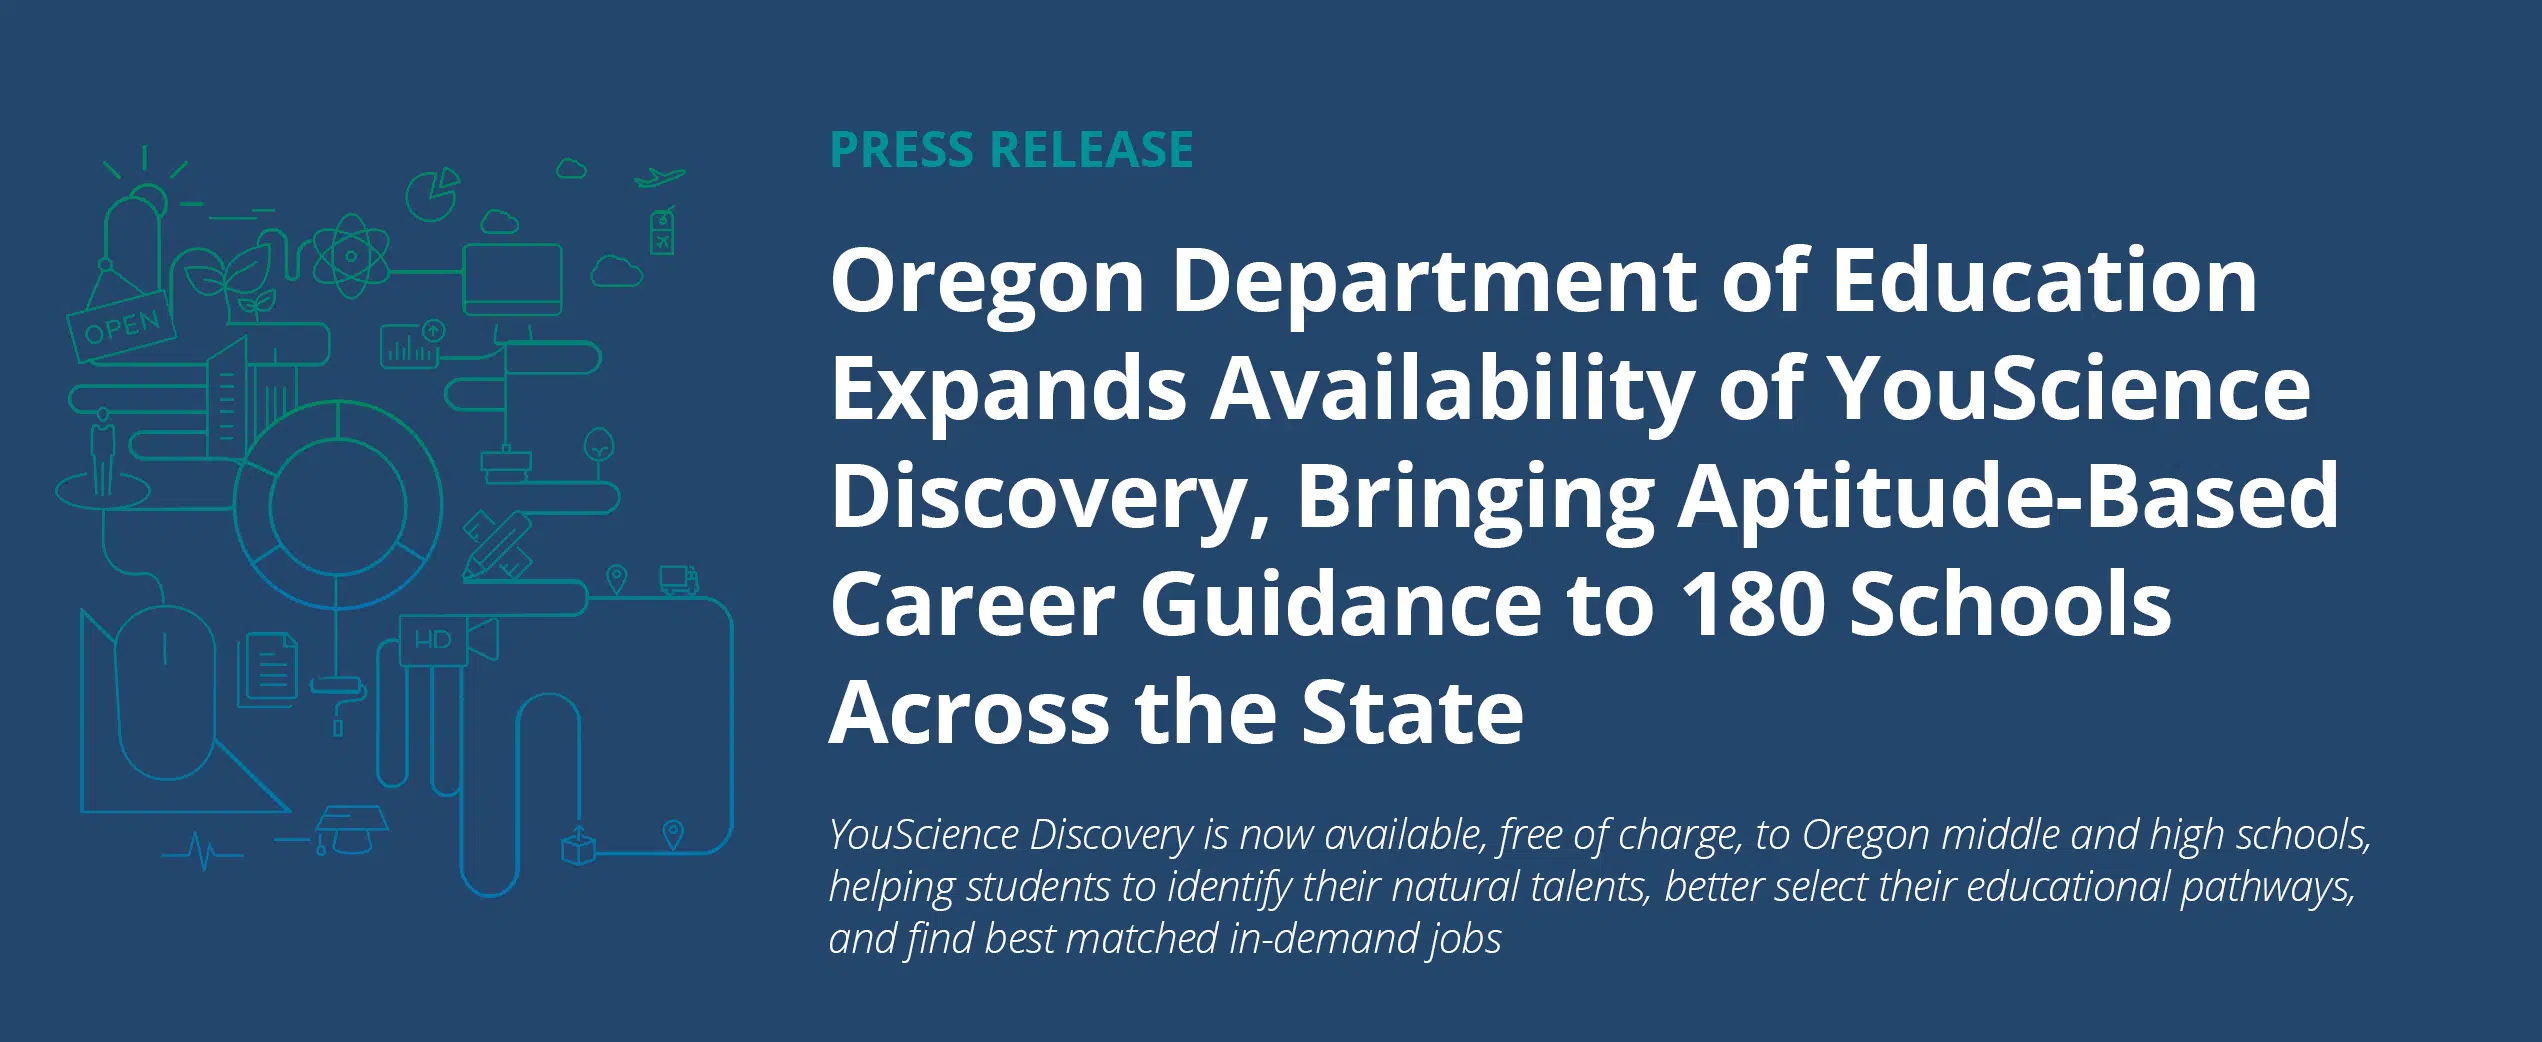 Oregon Department of Education Expands Availability of YouScience Discovery, Bringing Aptitude-Based Career Guidance to 180 Schools Across the State